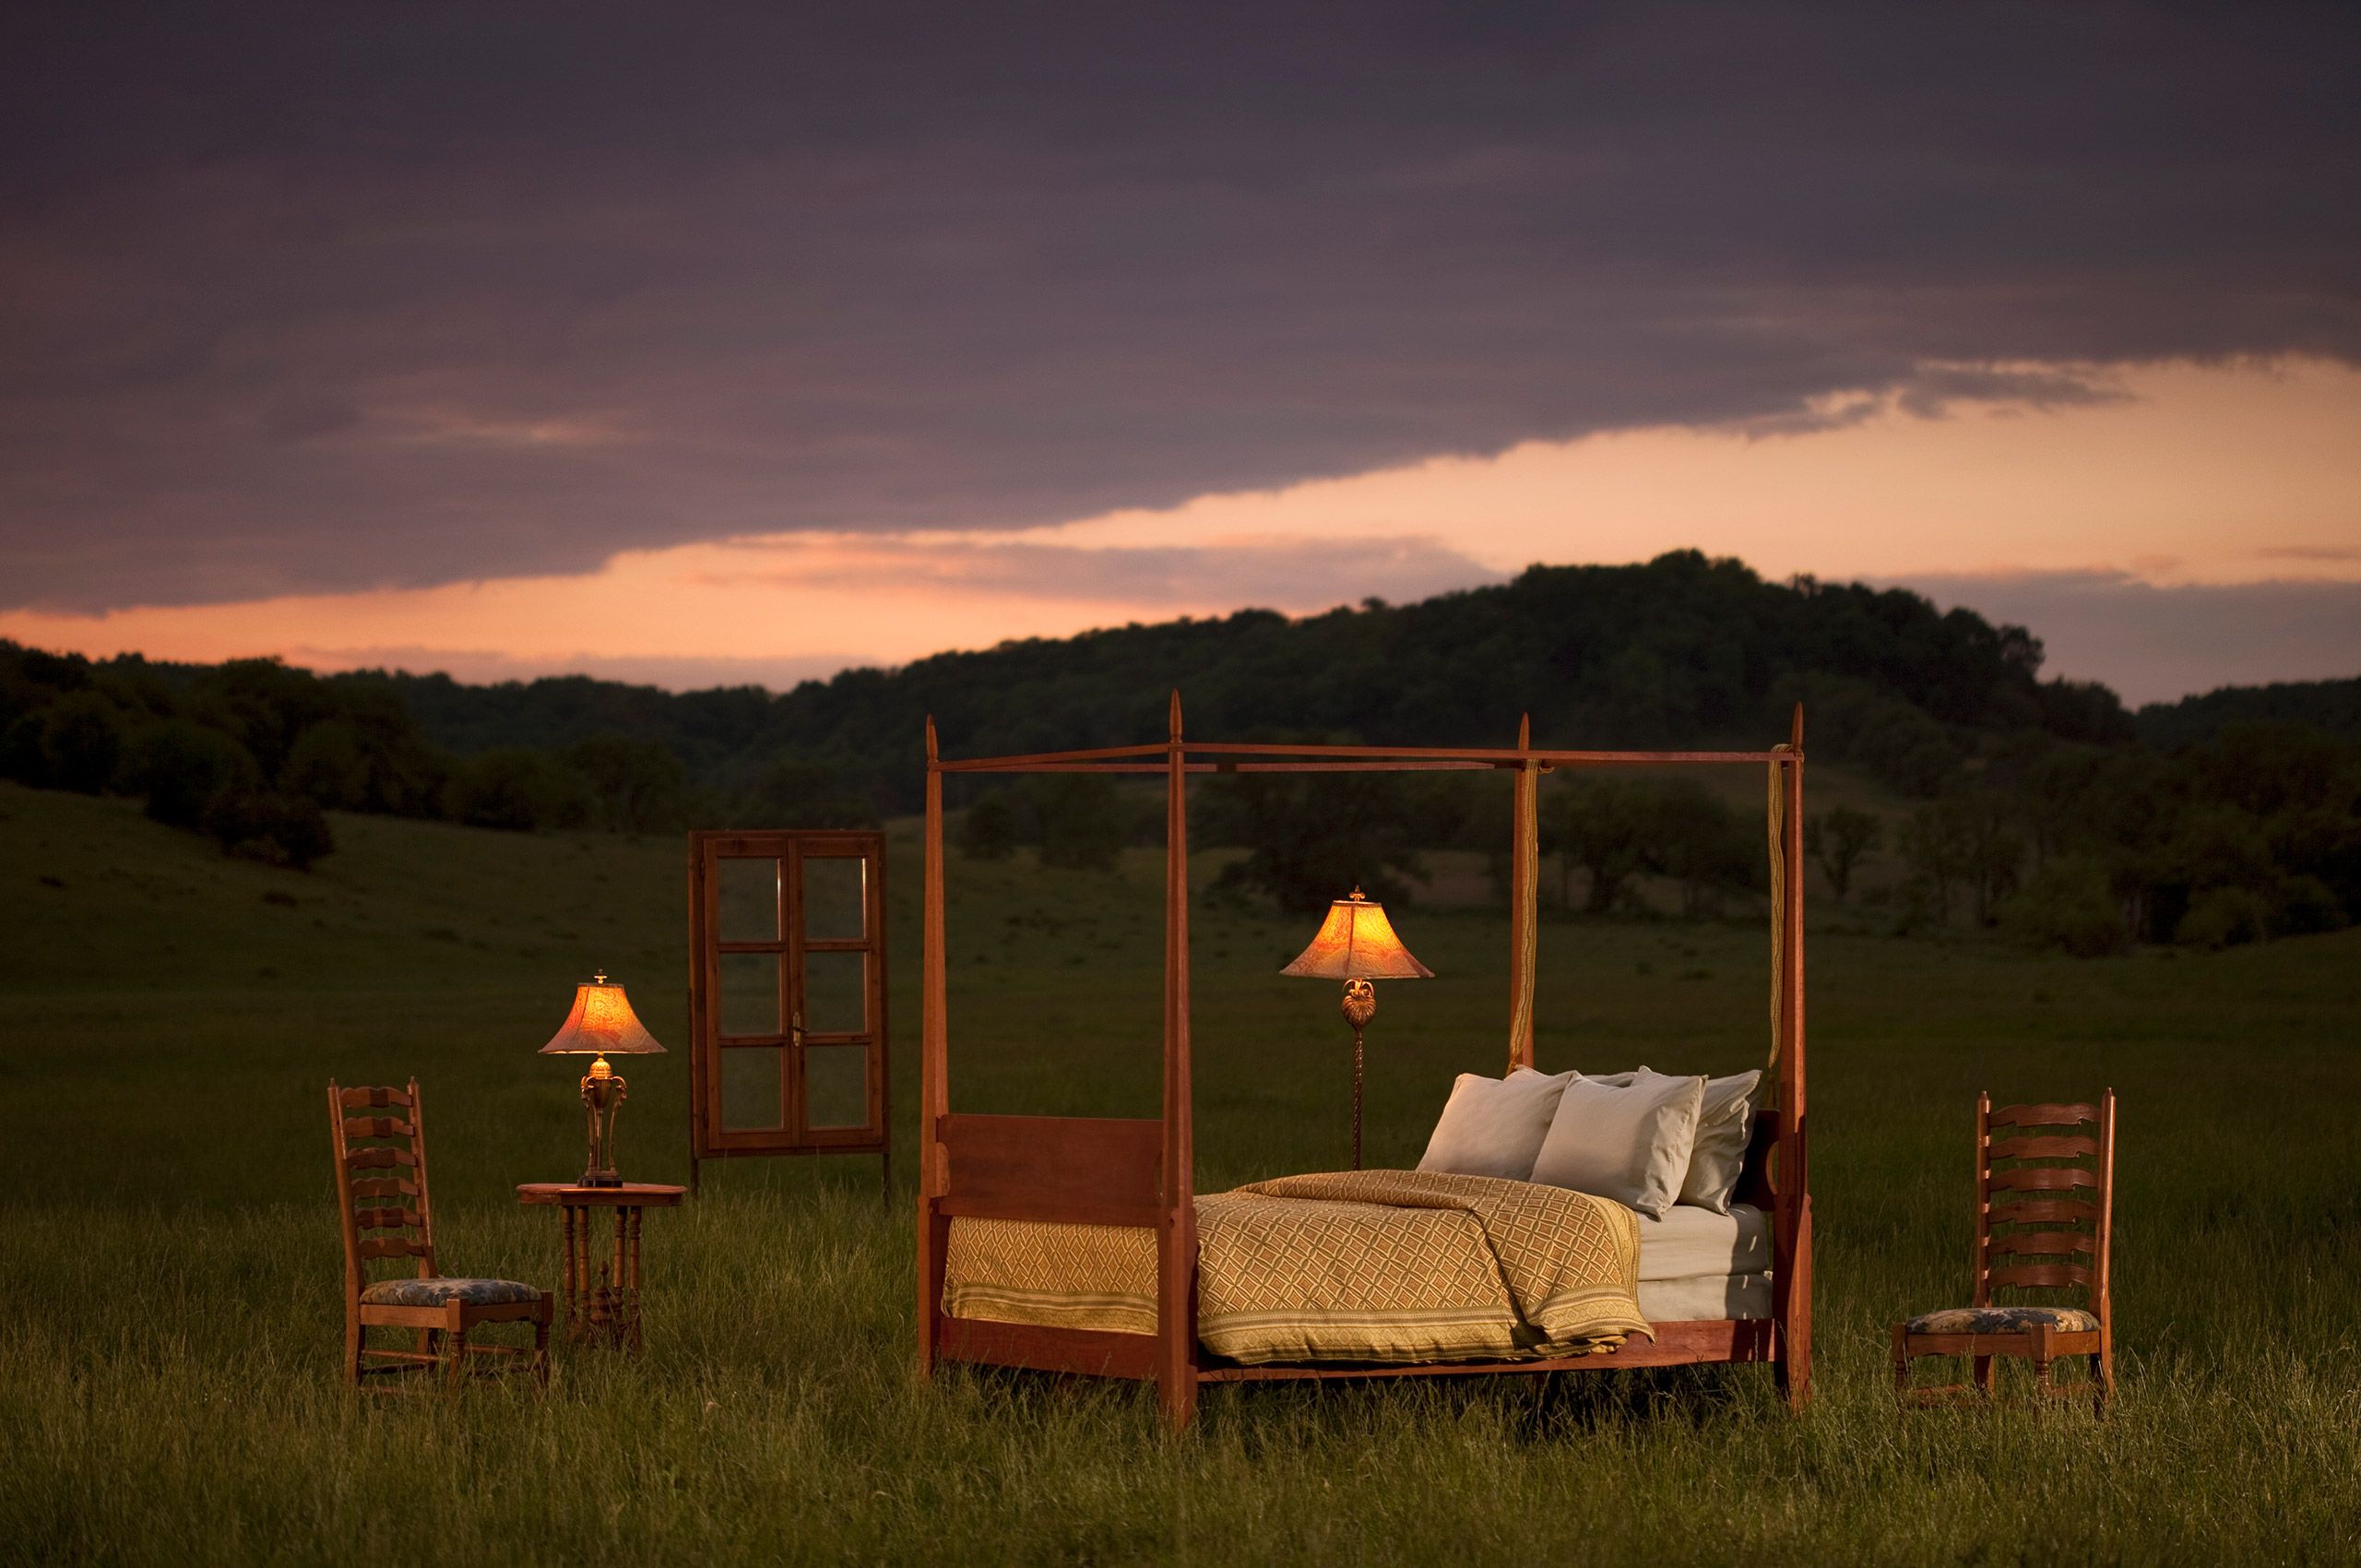 Exterior Architectural twilight photograph - Bed in field.jpg